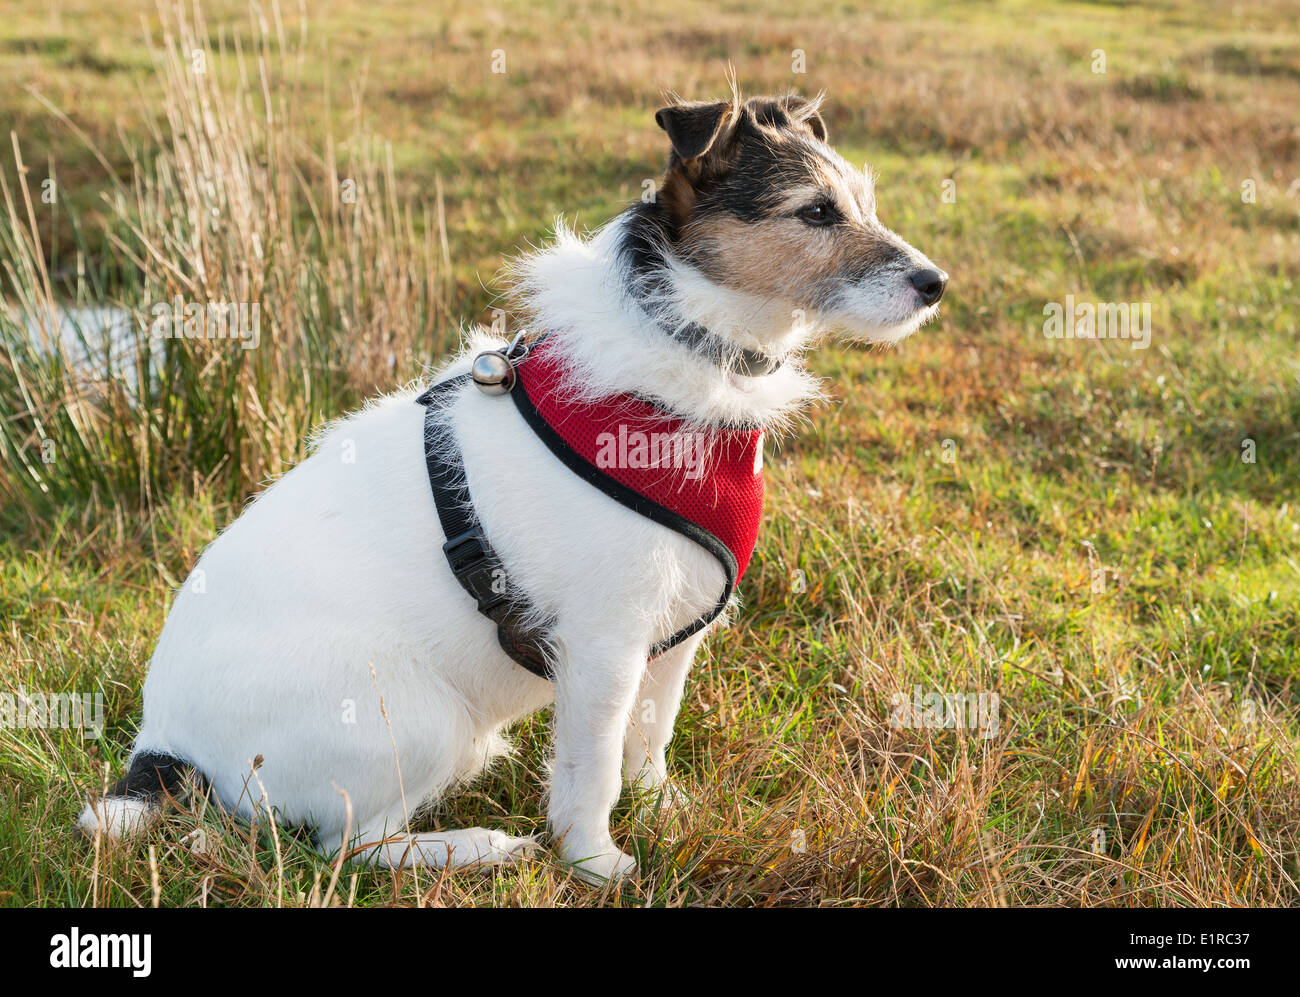 Working Parson Jack Russell Terrier wearing red harness and bell Stock Photo